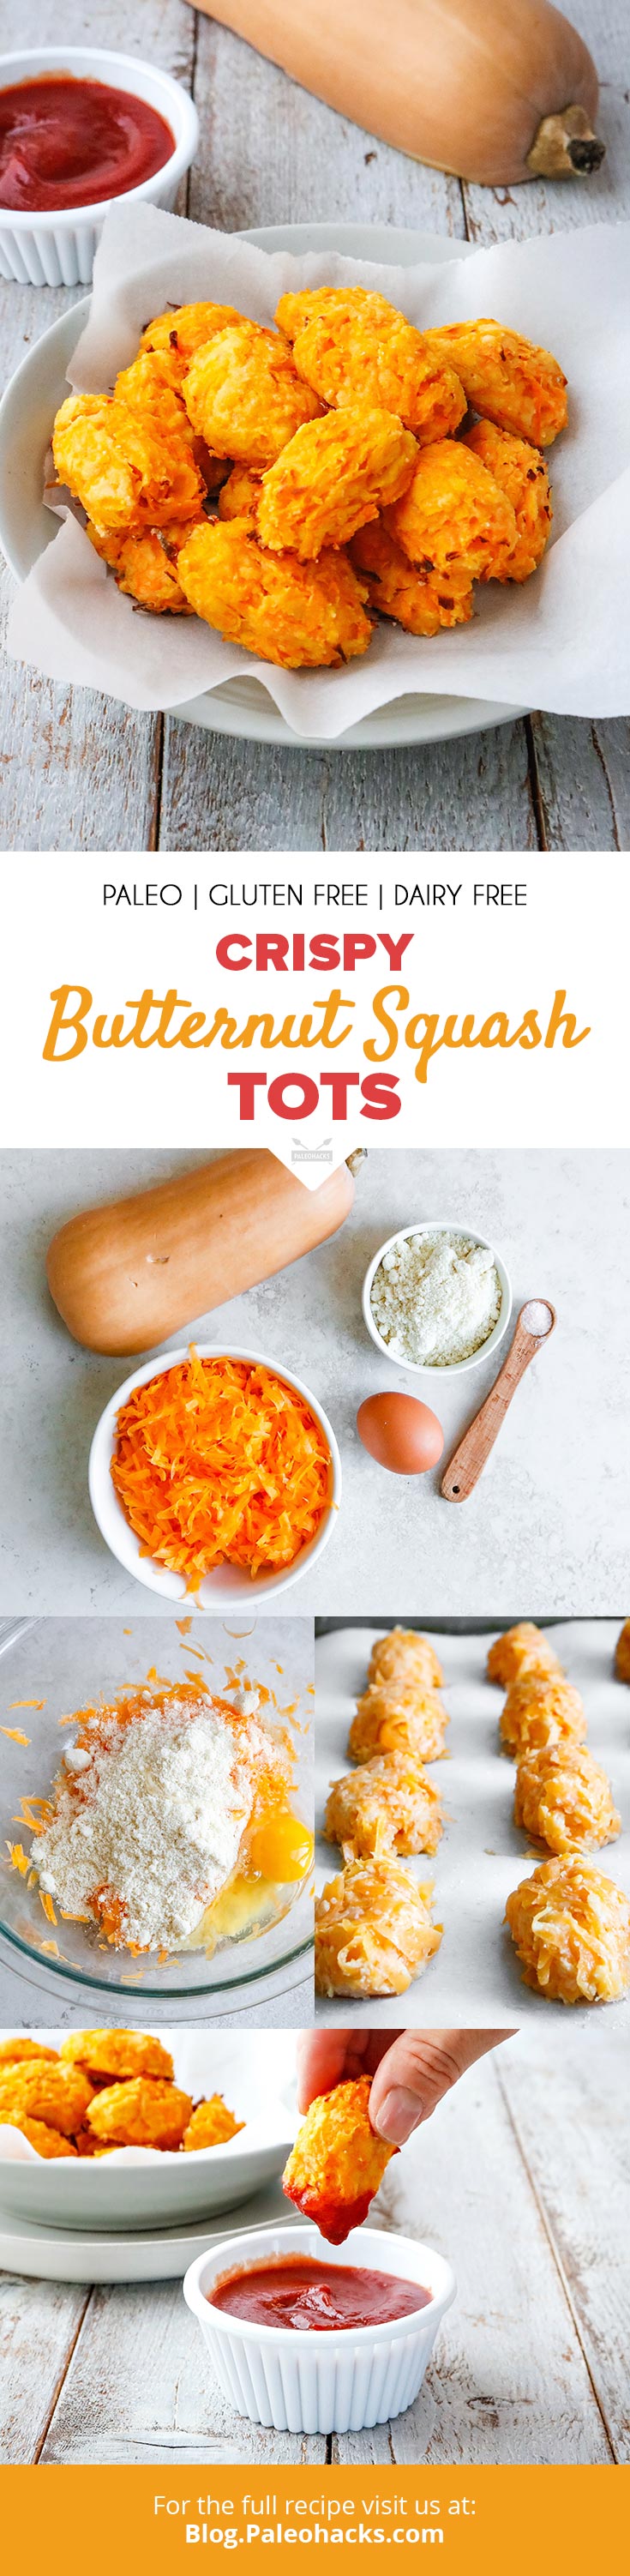 Make these butternut squash tots packed with antioxidants, fiber, and extra crispy flavor. The perfect companion to all your breakfast favorites!